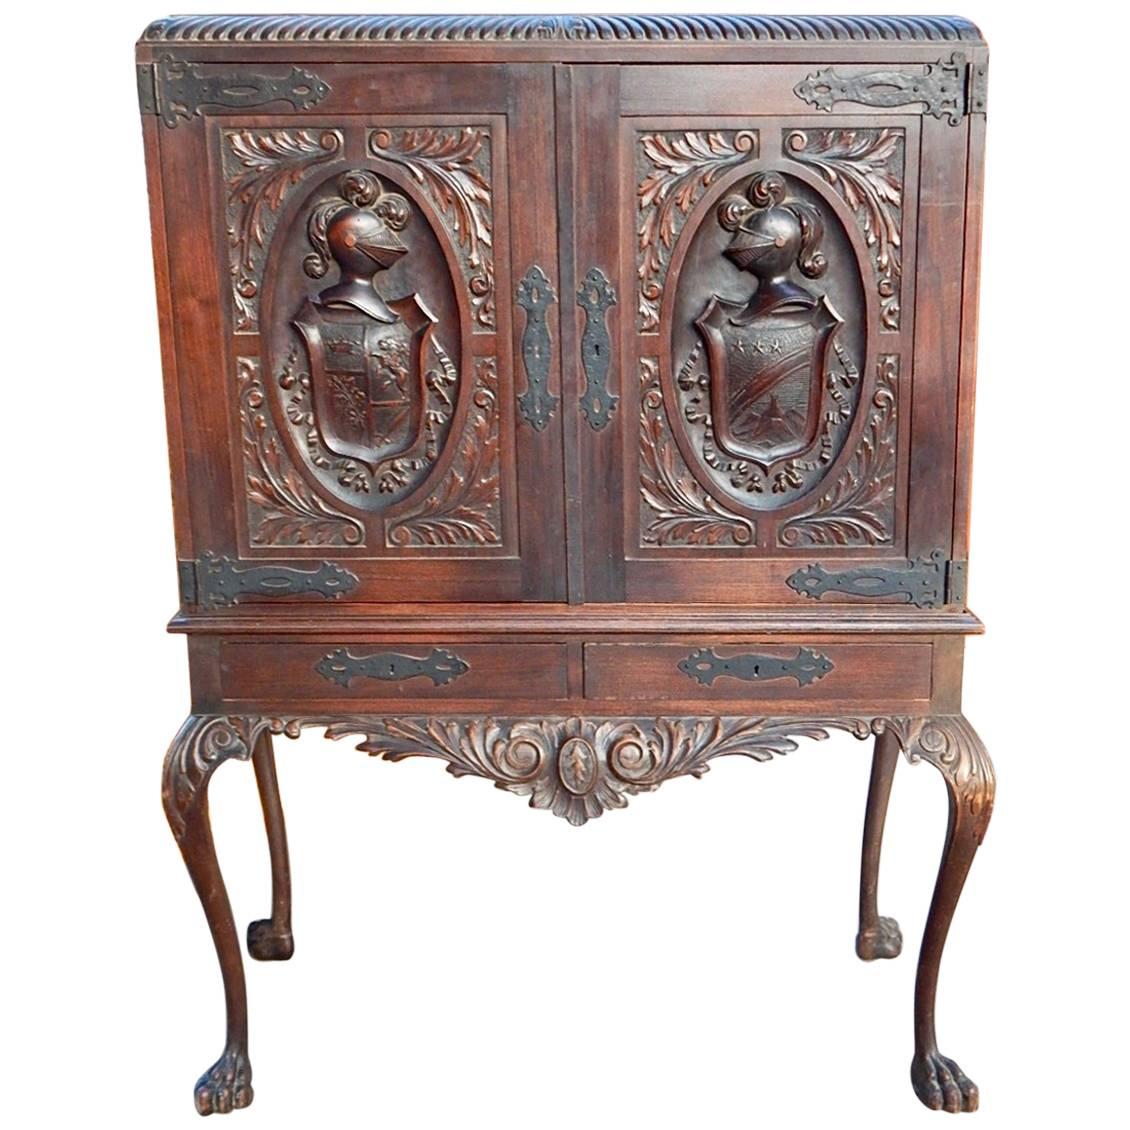 Argentine Spanish Colonial storage cabinet with heraldic theme doors and hand carved animal leg base. 
 With hammered metal strap hinges. In original condition as acquired in South America. Circa 1920
Item is sold without original key but is